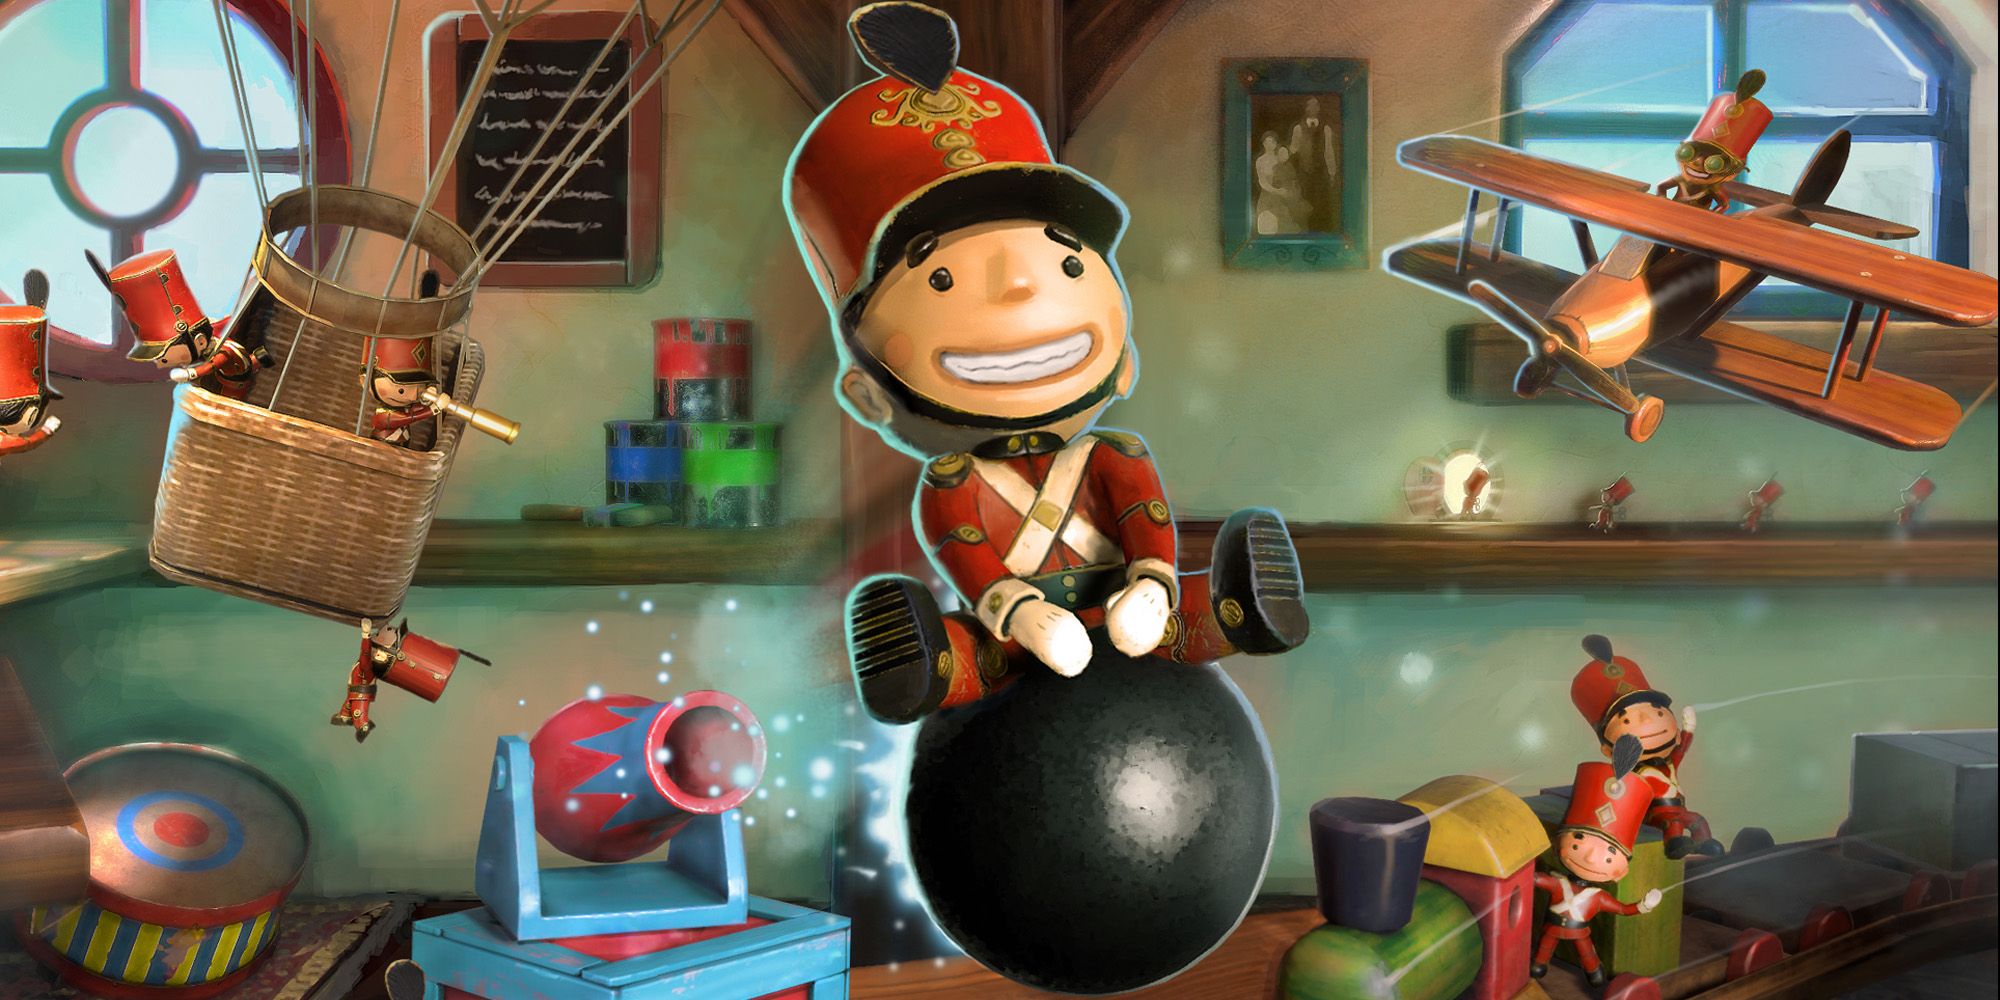 Promotional image for Tin Hearts showing a toy soldier sitting atop a flying cannonball in front of other soldiers flying a hot air balloon and biplane.